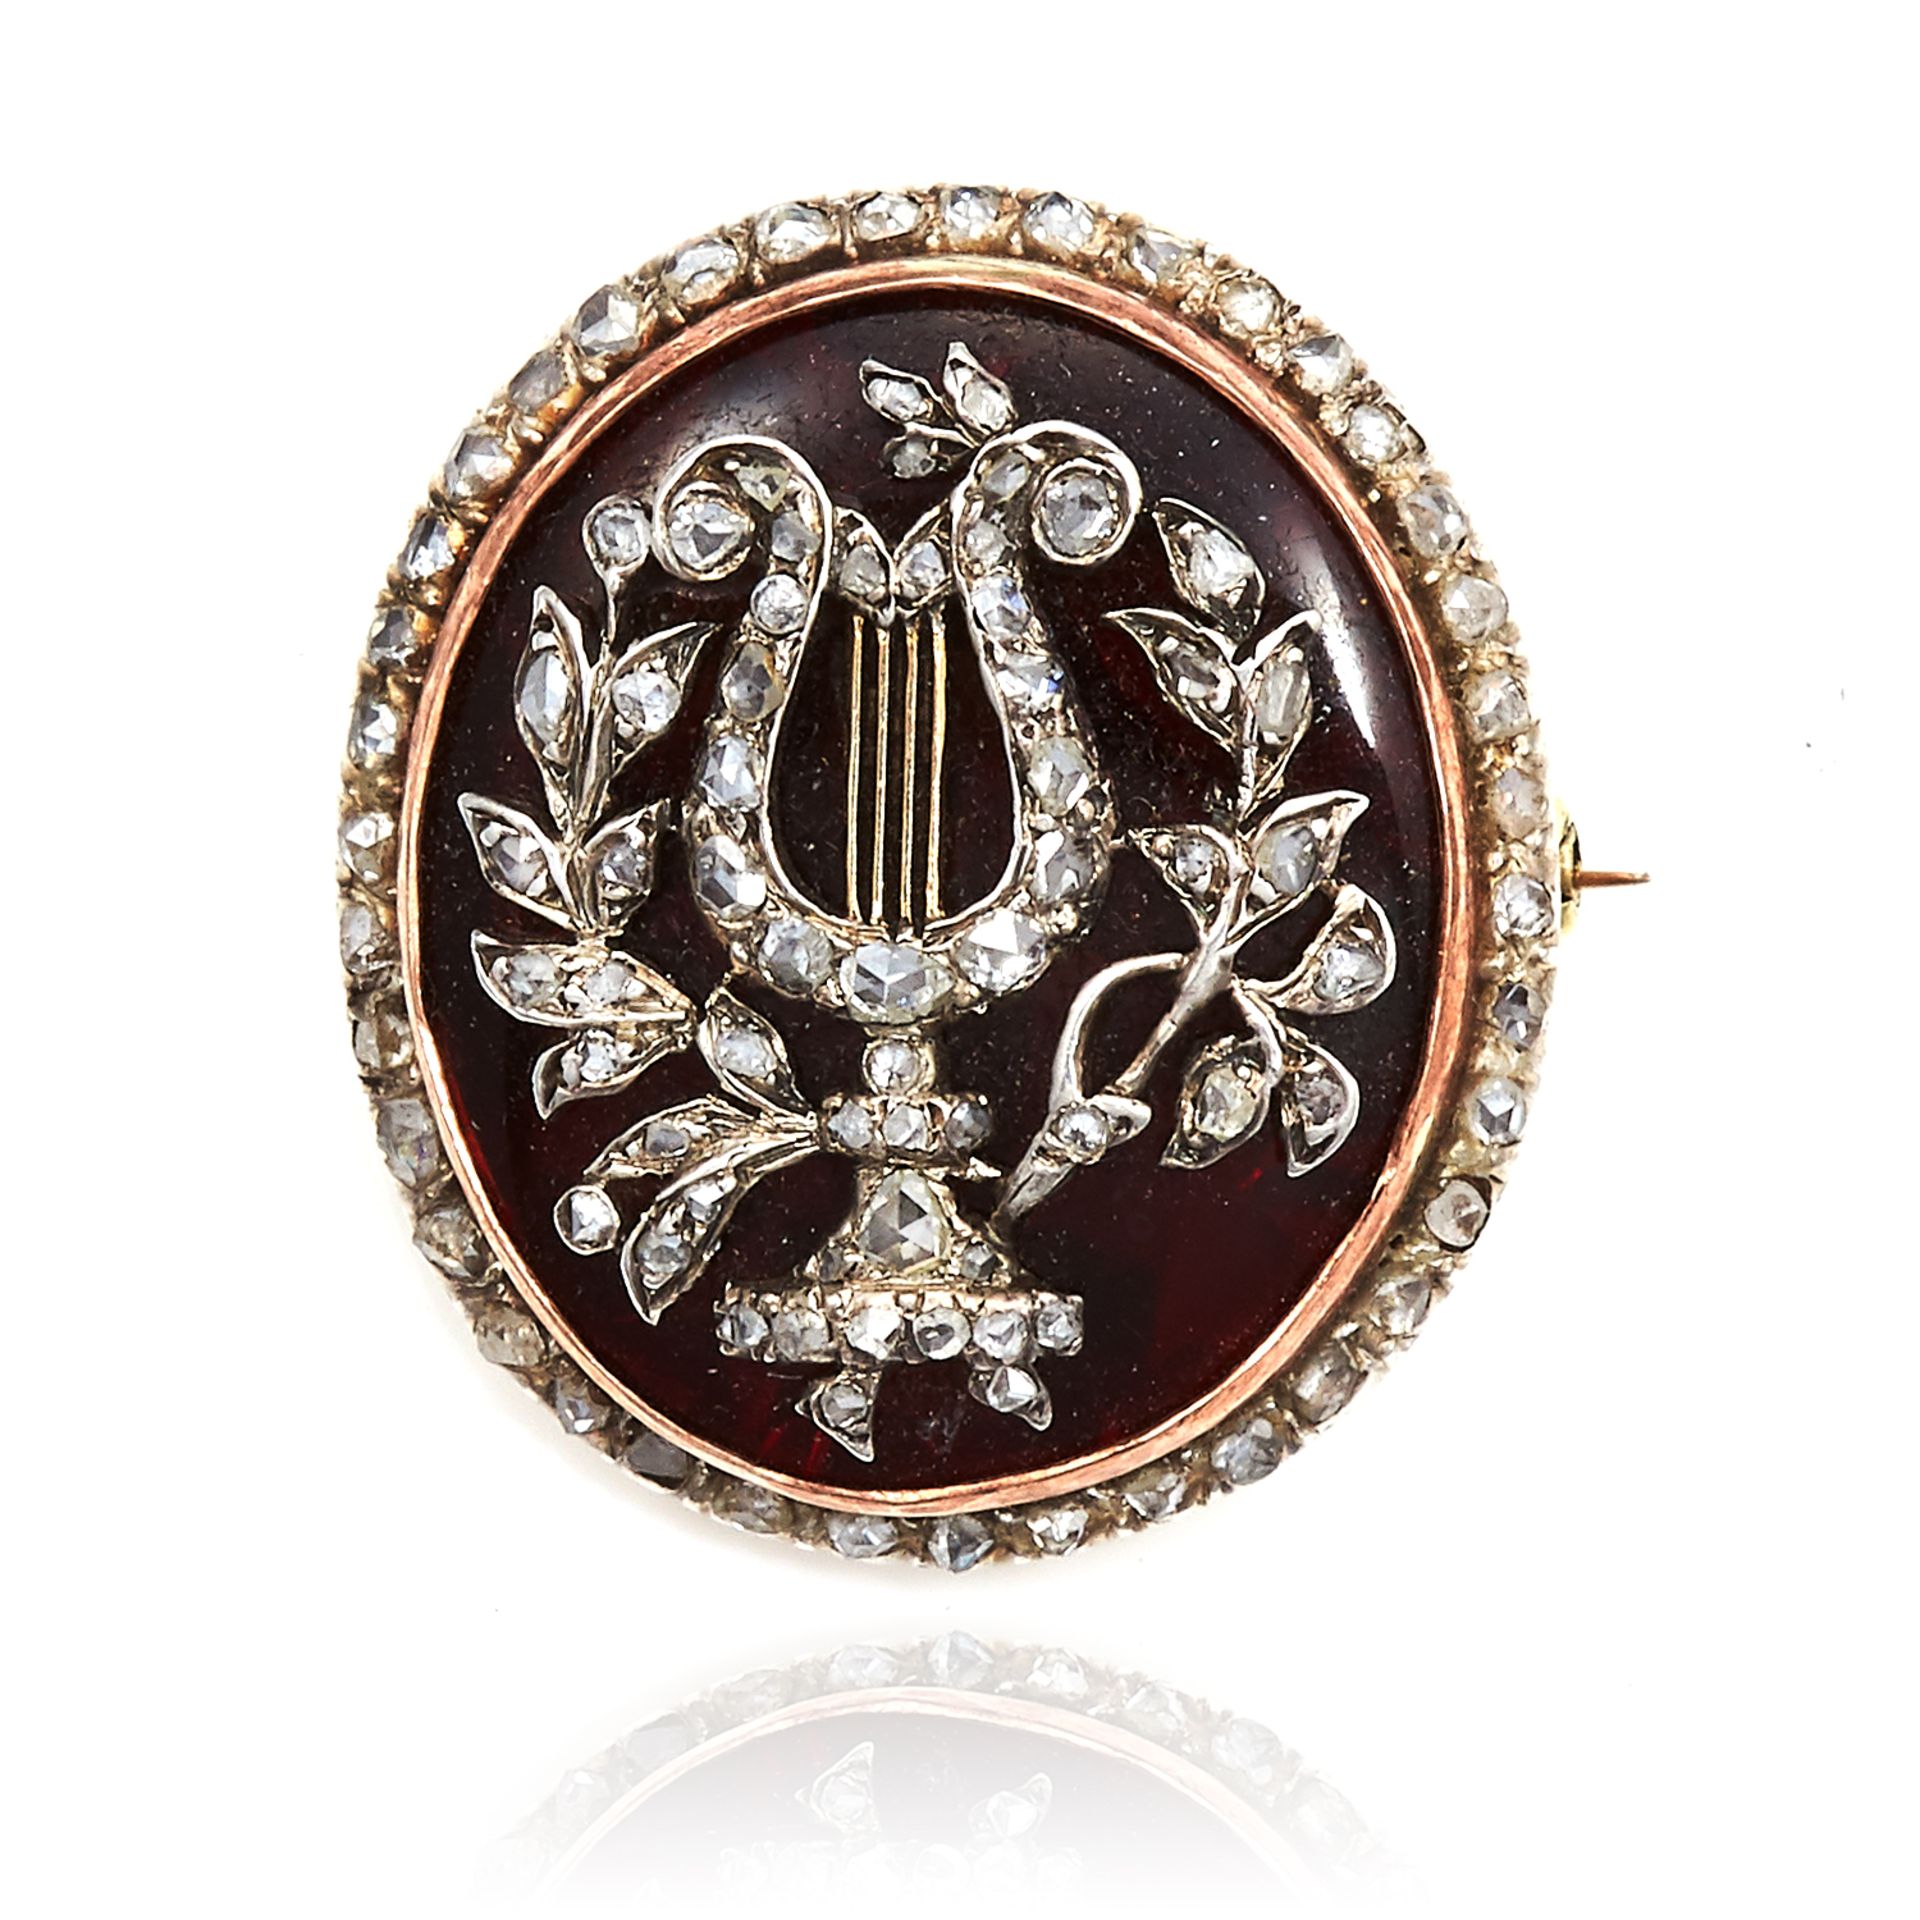 AN ANTIQUE DIAMOND AND GARNET BROOCH, EARLY 19TH CENTURY in high carat yellow gold, the oval body